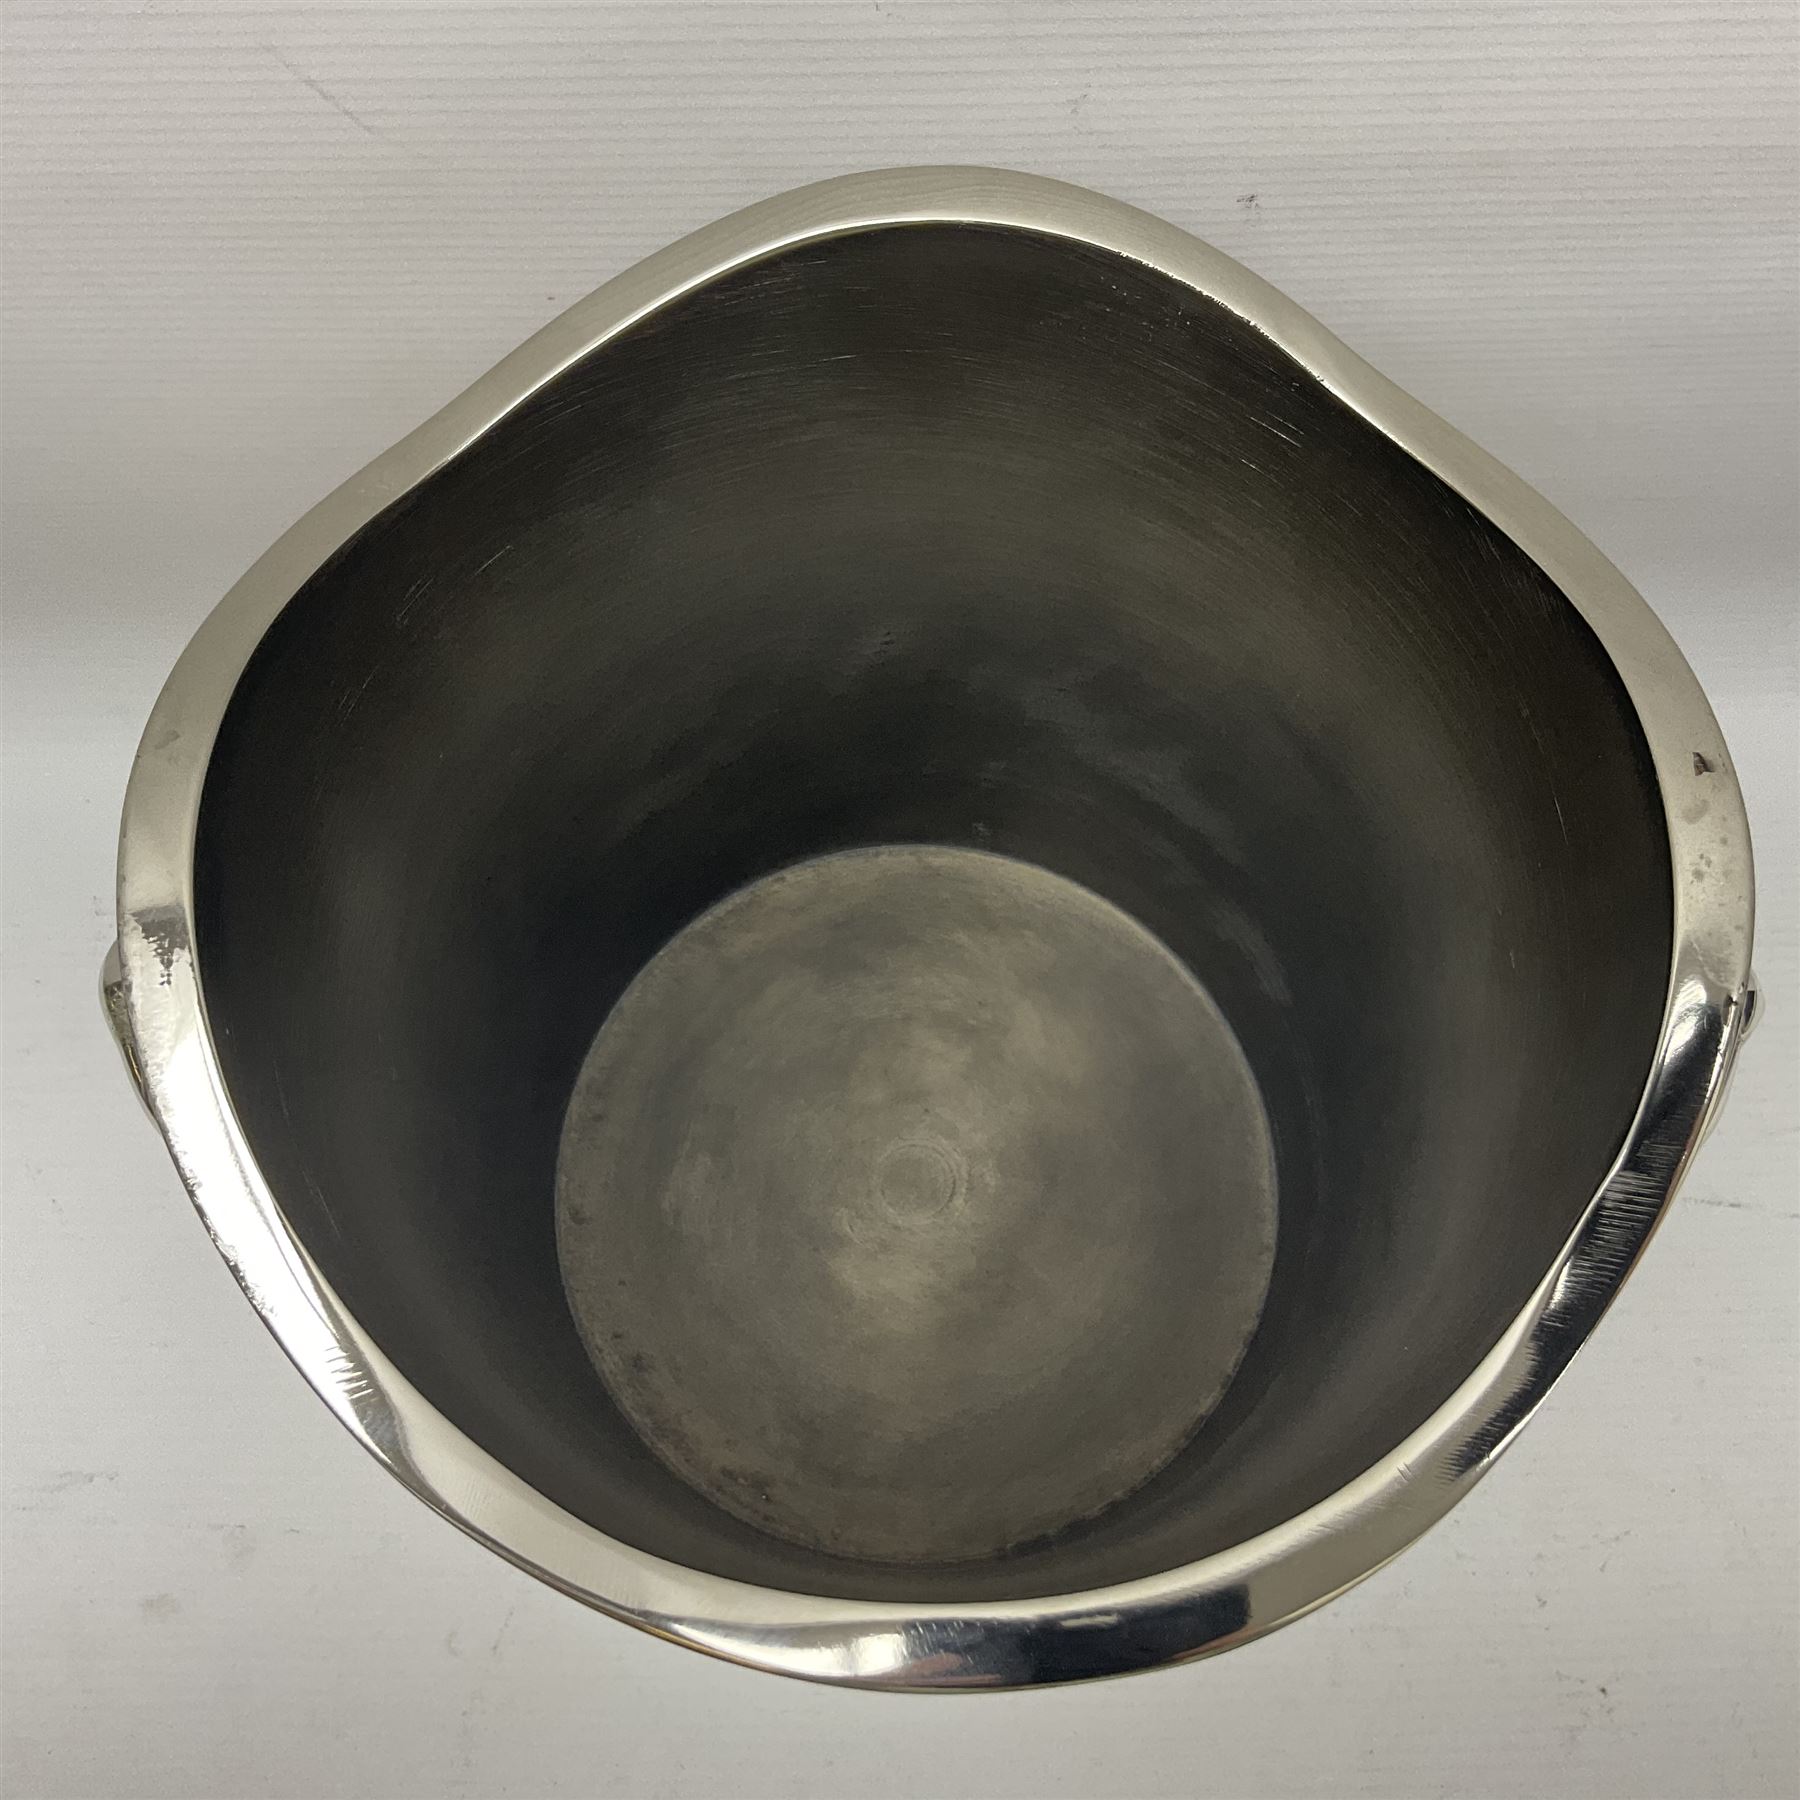 Polished modern aluminium champagne bucket inscribed White Star Line - Image 2 of 6